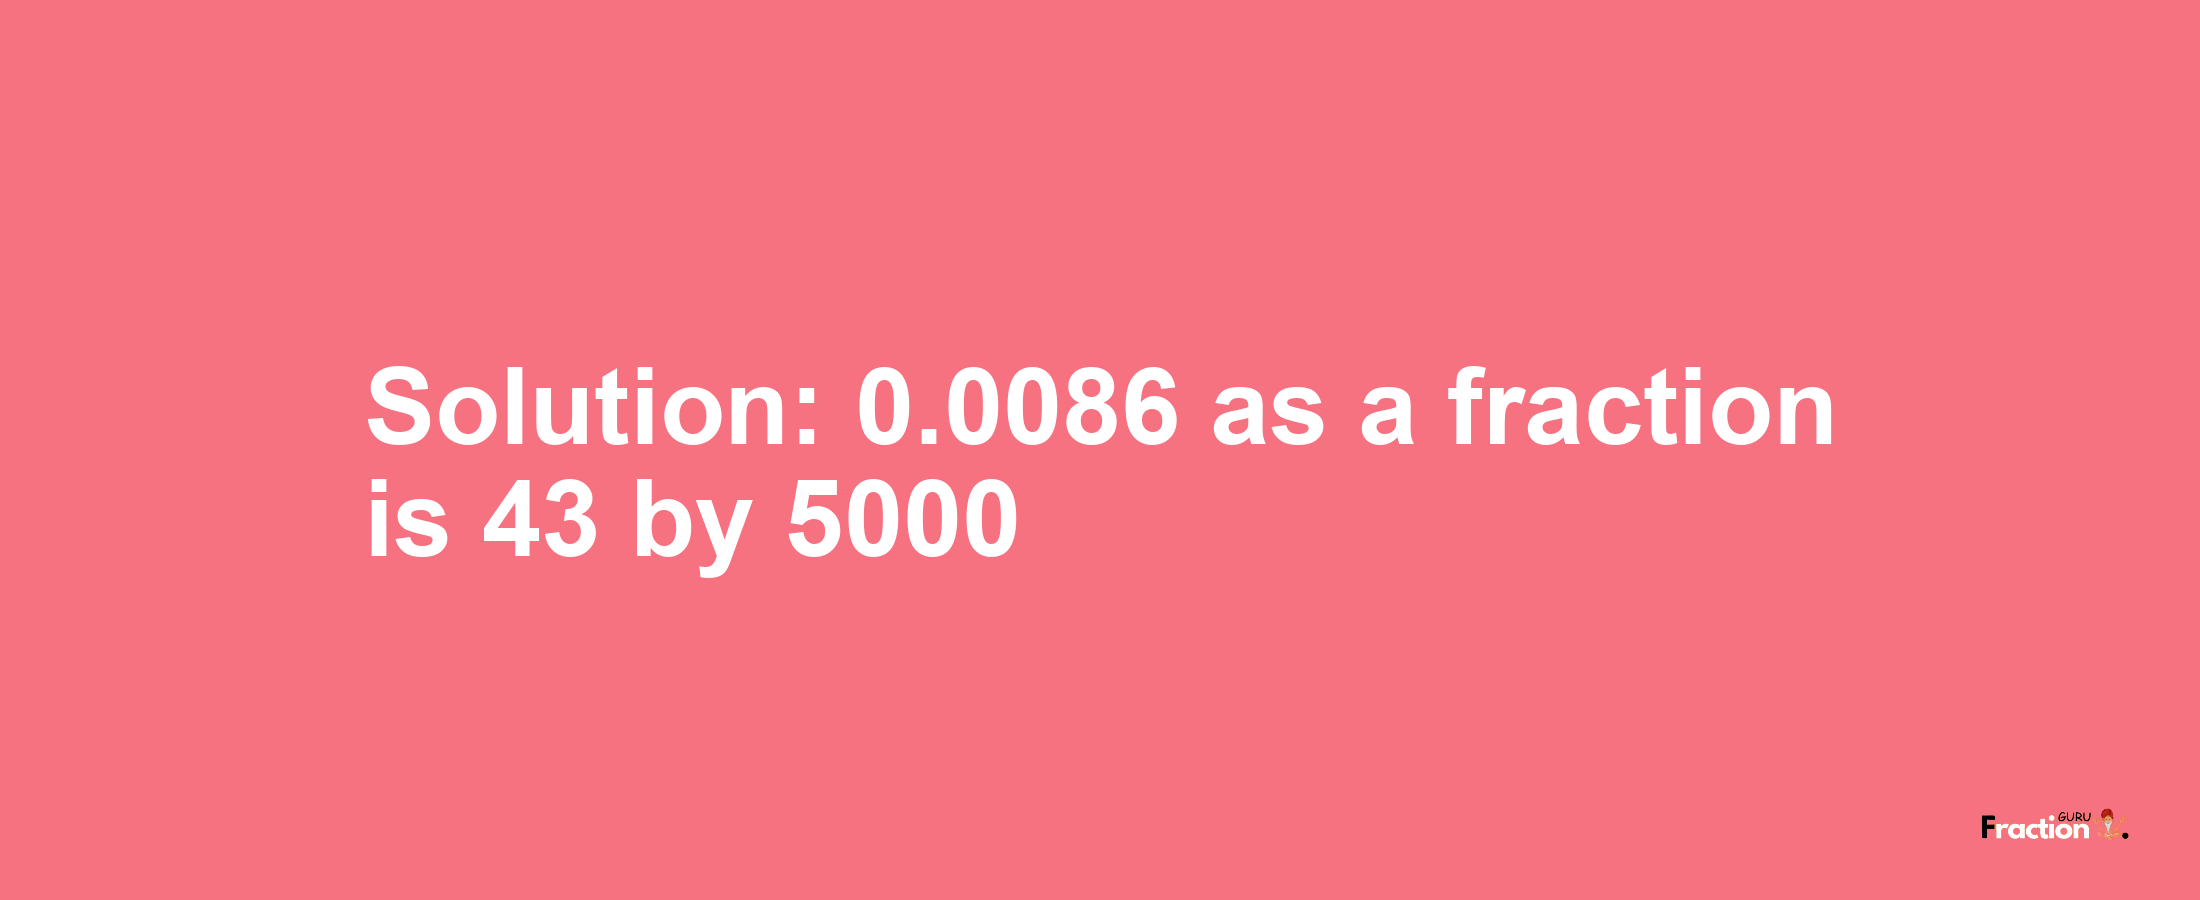 Solution:0.0086 as a fraction is 43/5000